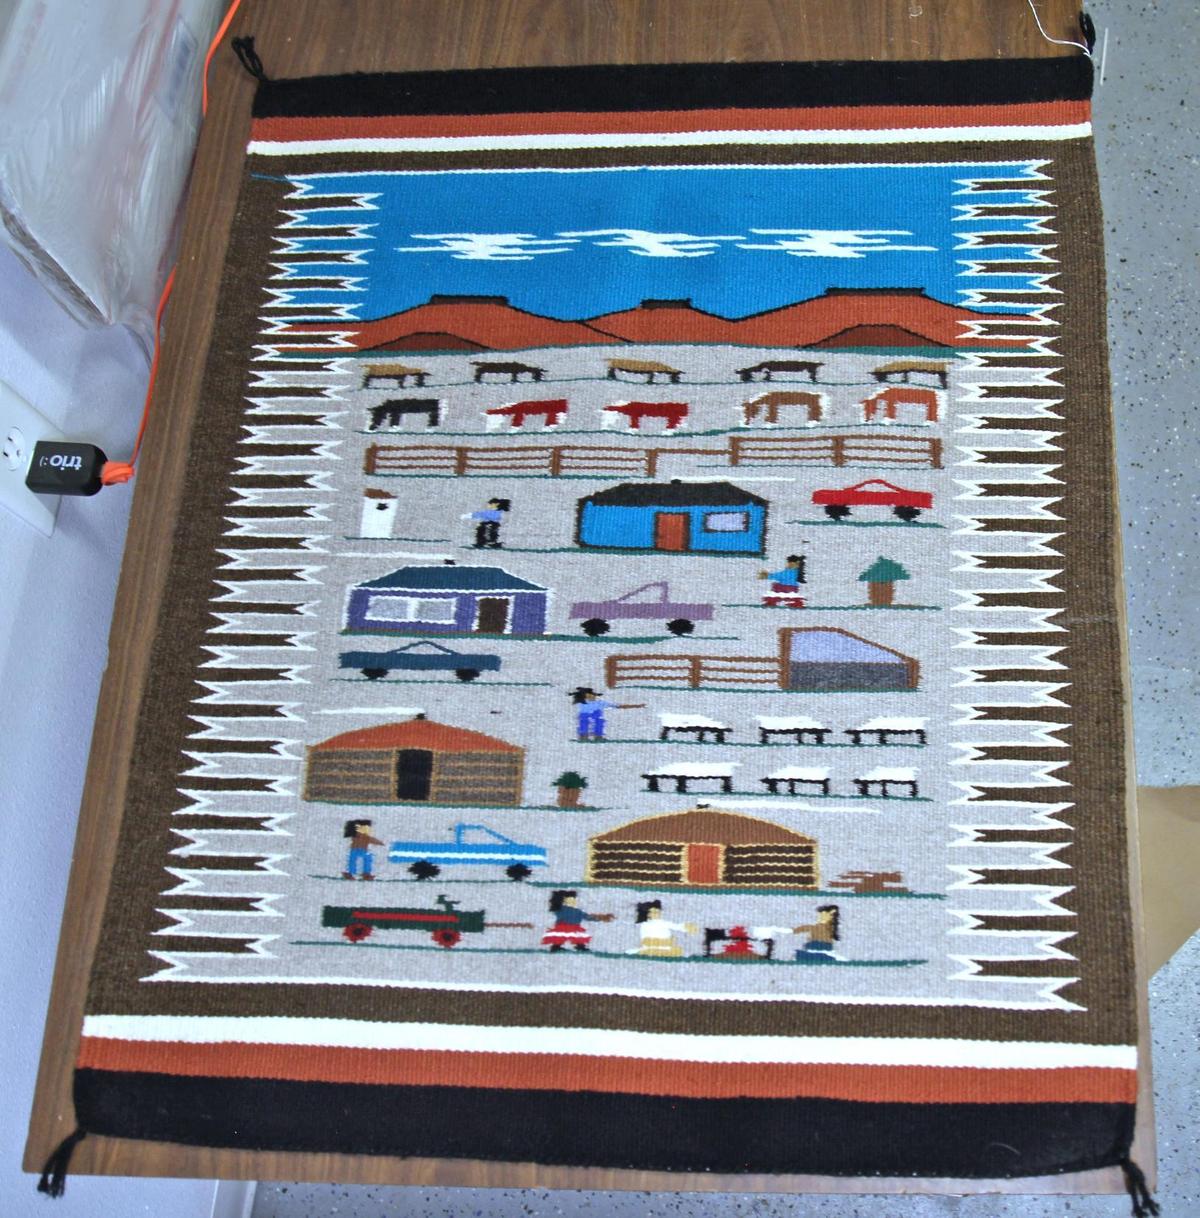 Navajo Woven Rug Depicts Livestock, Cowboys, Cowgirls, Ranch, Cabins, and Trucks, 28 1/2" x 34"...